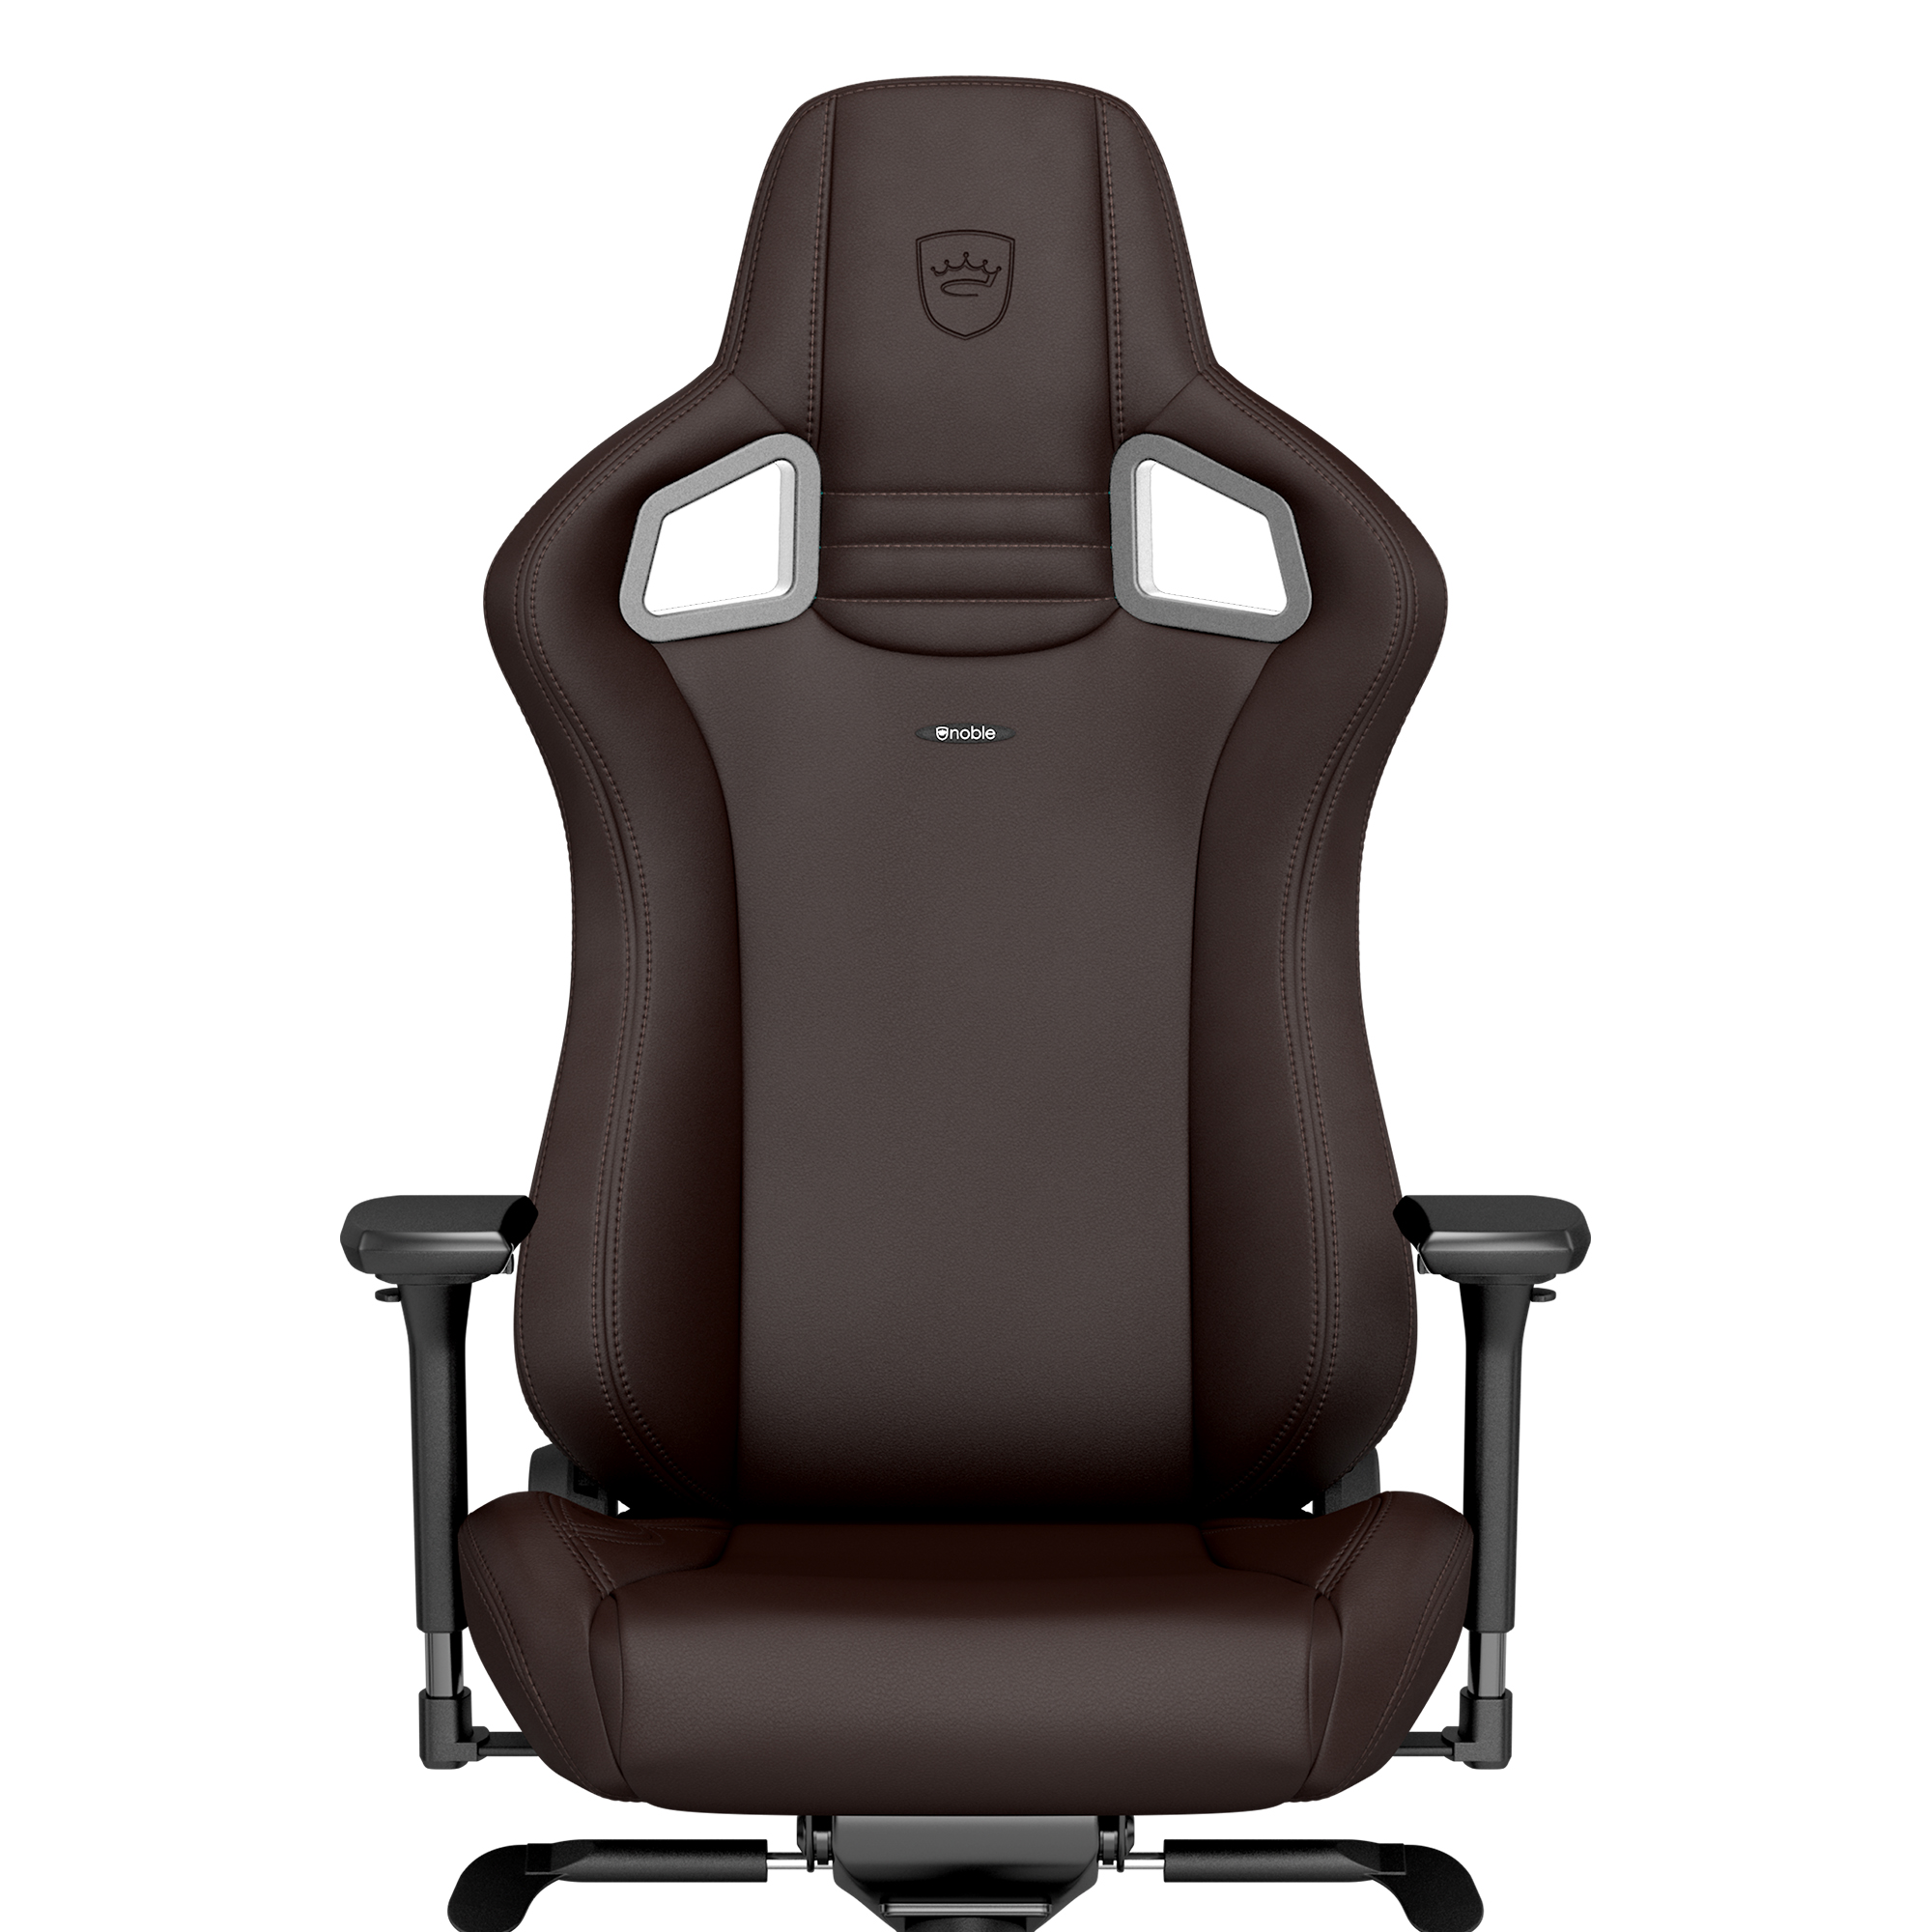 noblechairs - noblechairs EPIC Gaming Chair - Java Edition